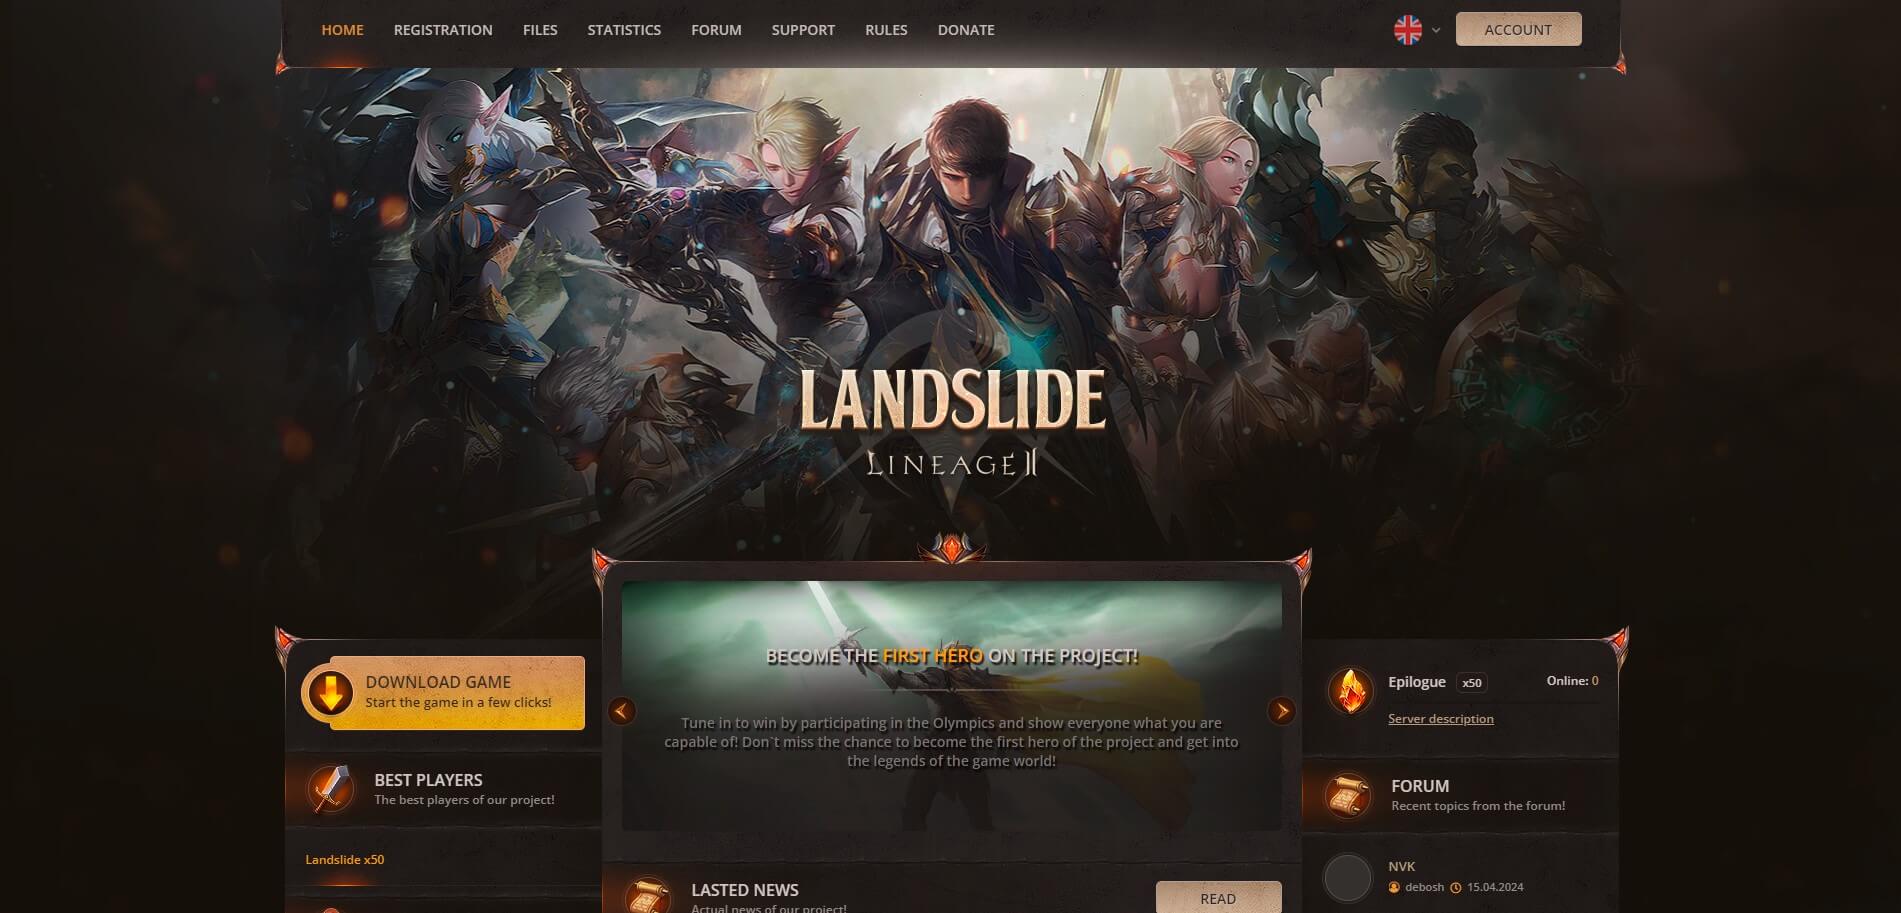 🌟🔥 Welcome to Lineage 2 Epilogue server with x50 rates on l2landslide.com! Let the adventure begin! 🔥🌟